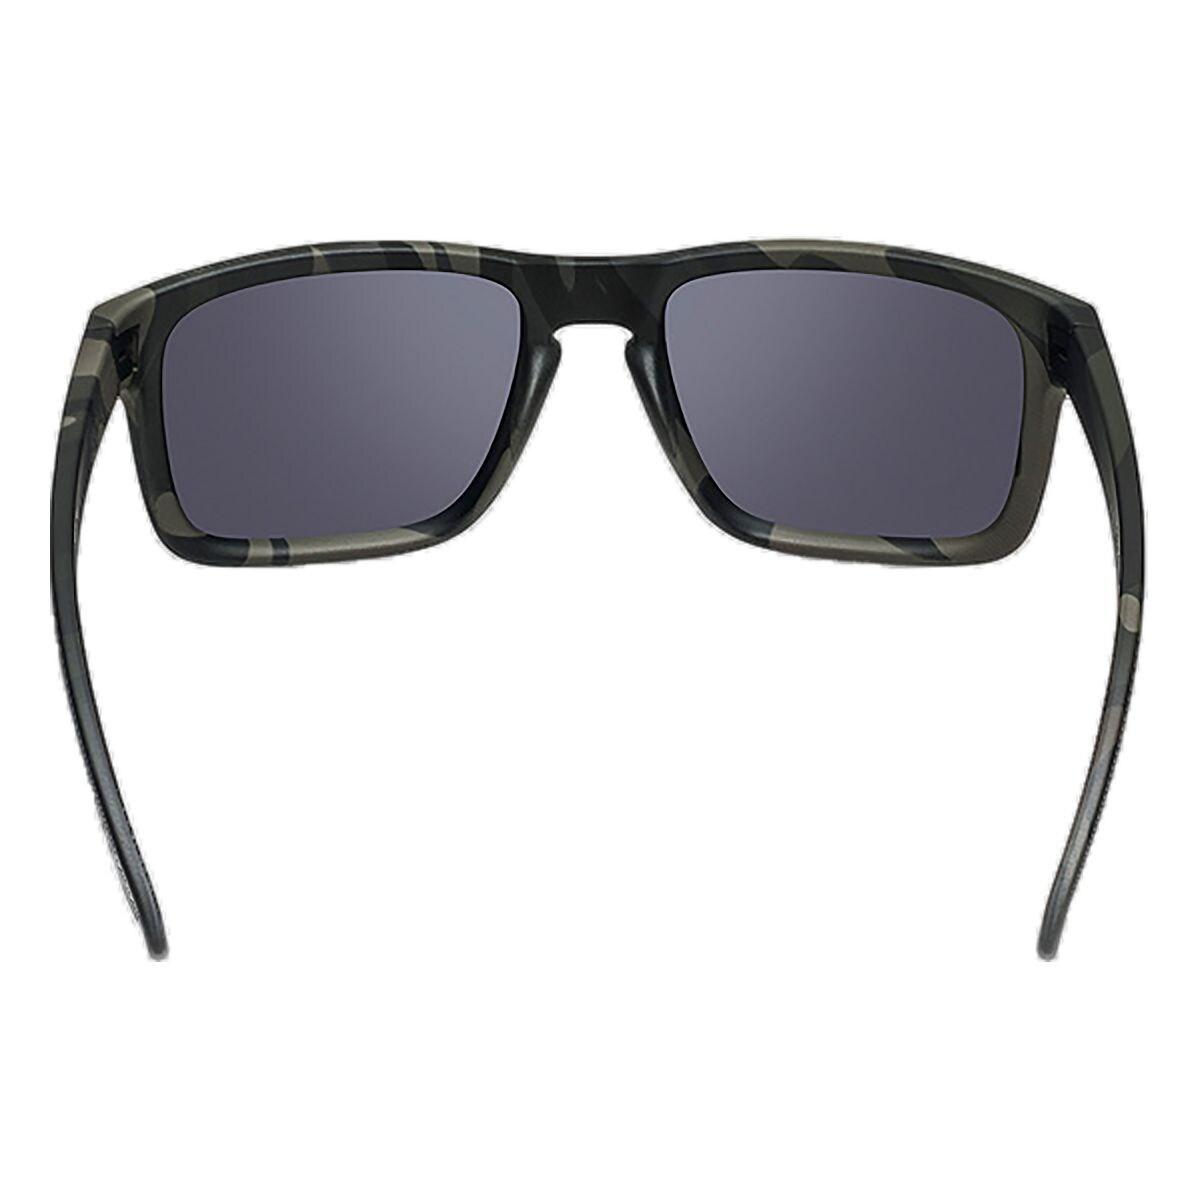 Purchase The Oakley Sunglasses Holbrook Multicam Black By Asmc